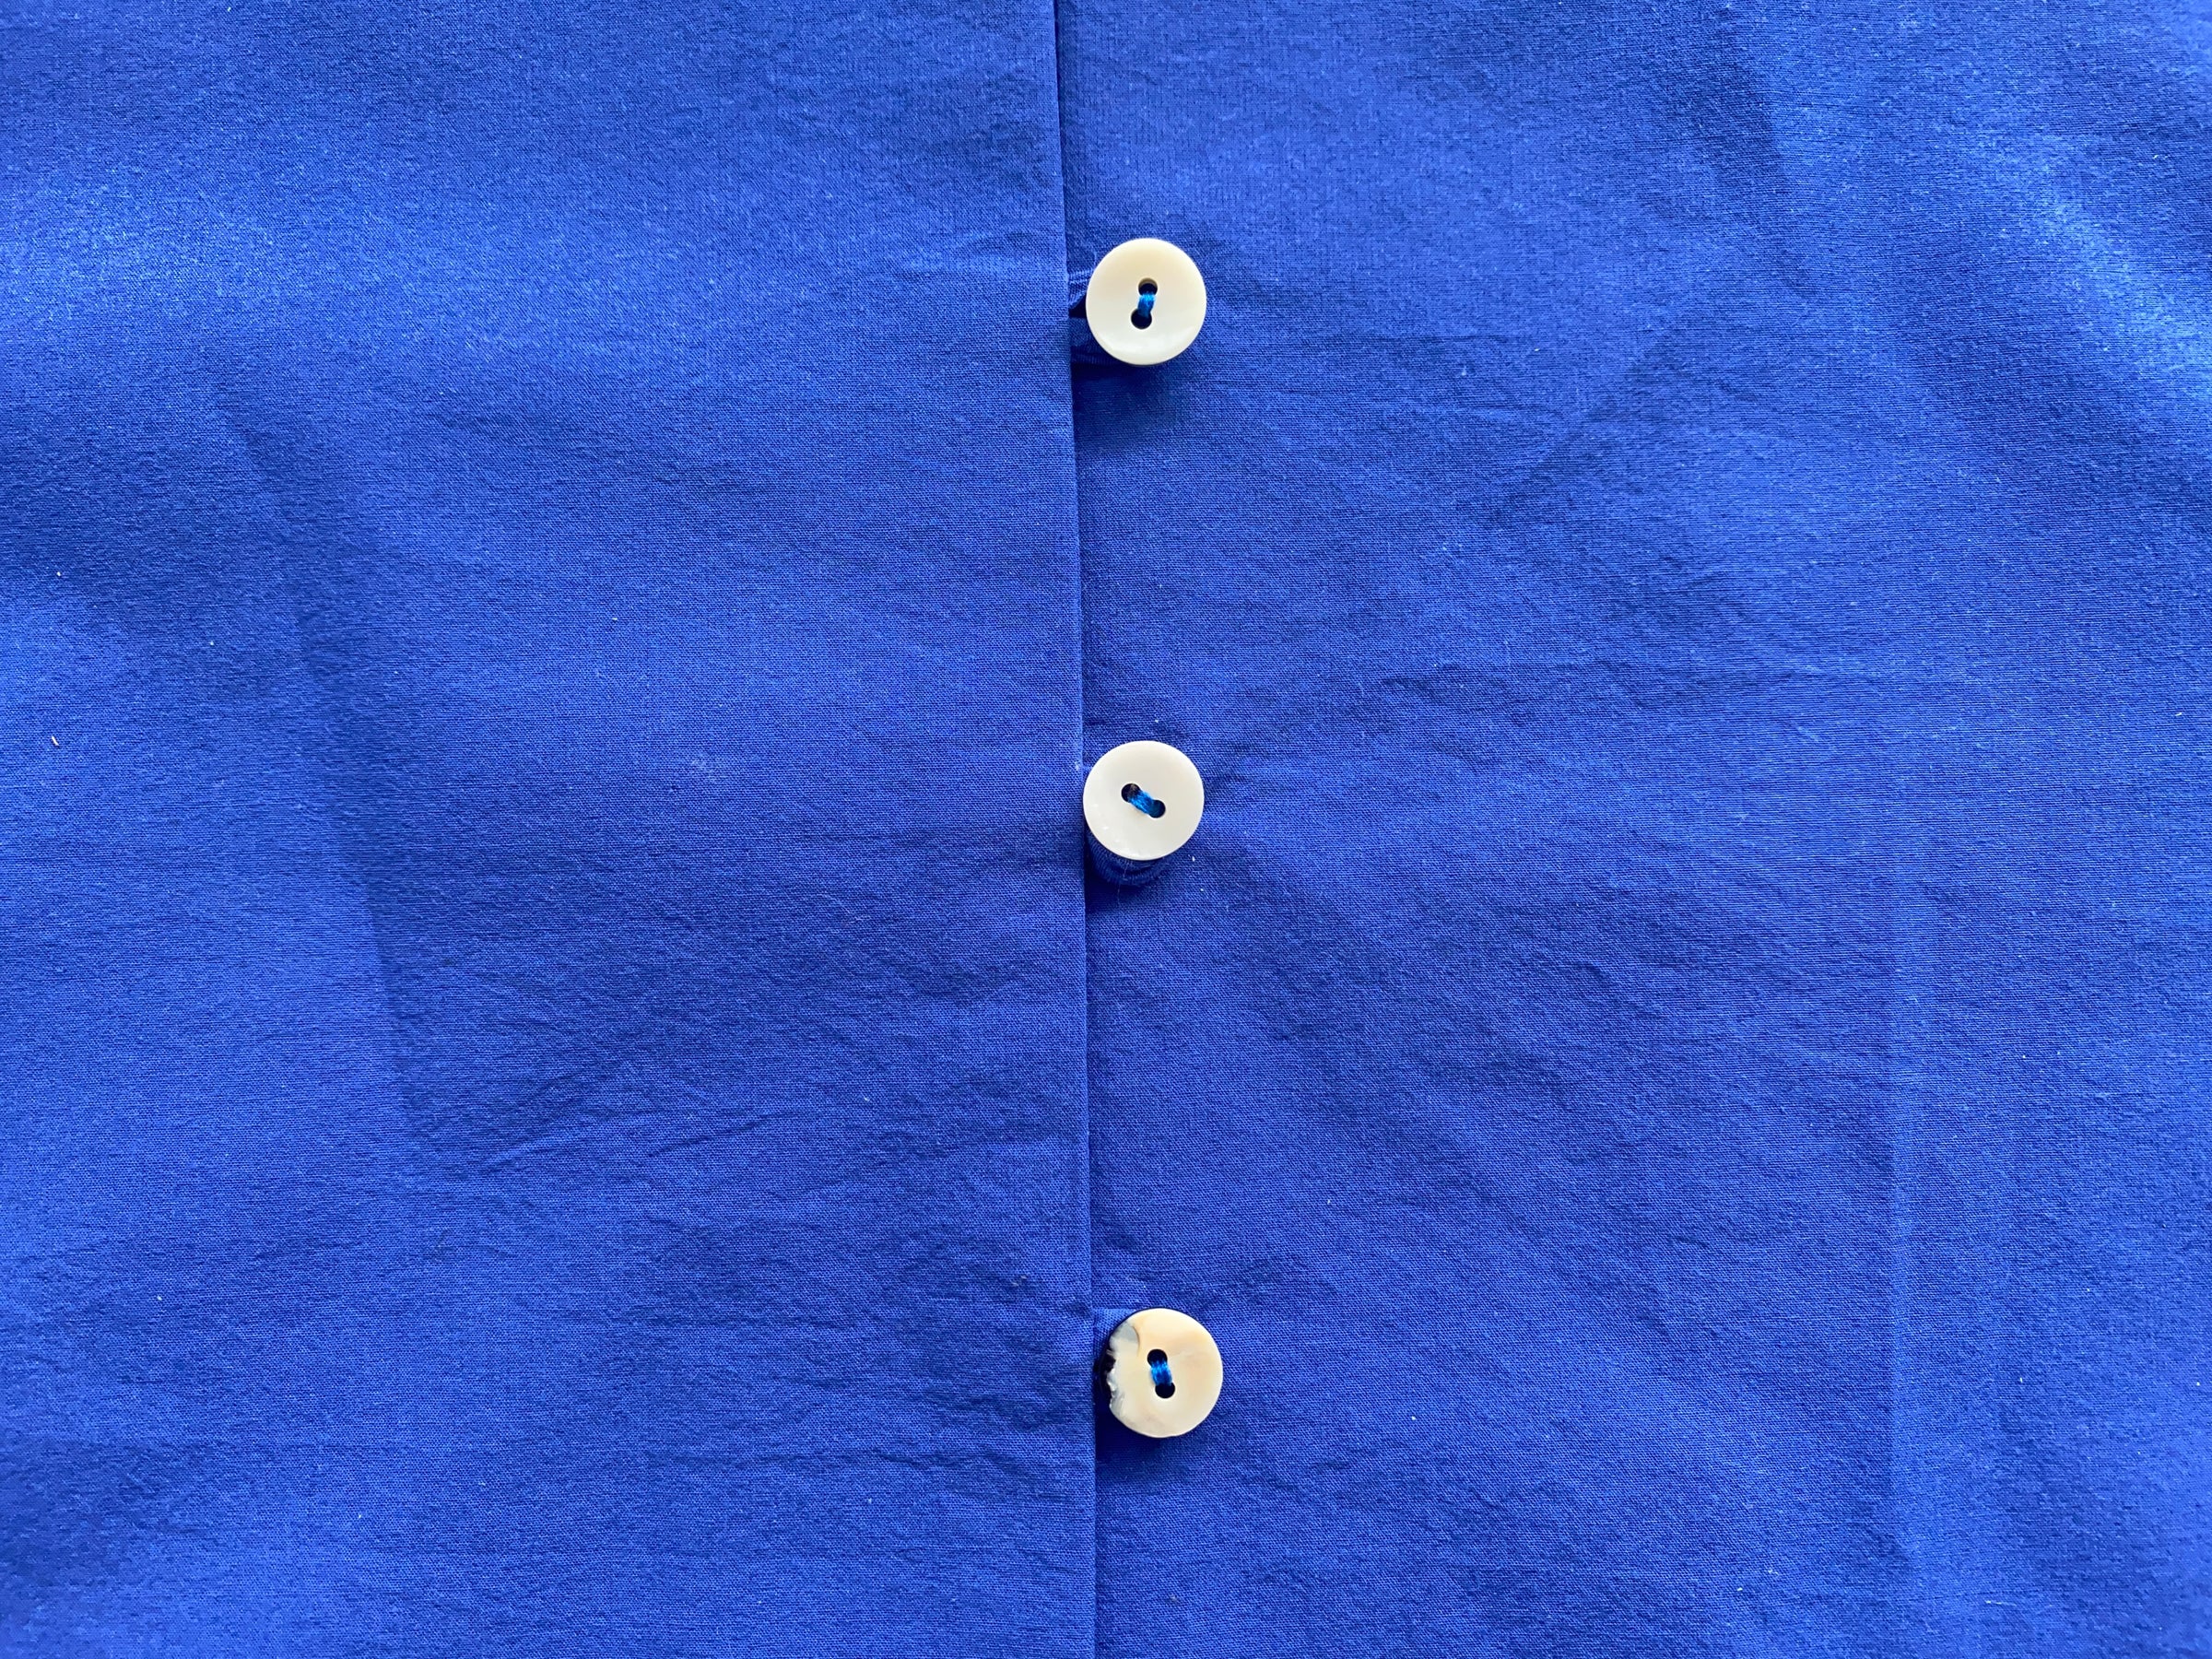 How to Add a Thread Shank to a Flat Back Button